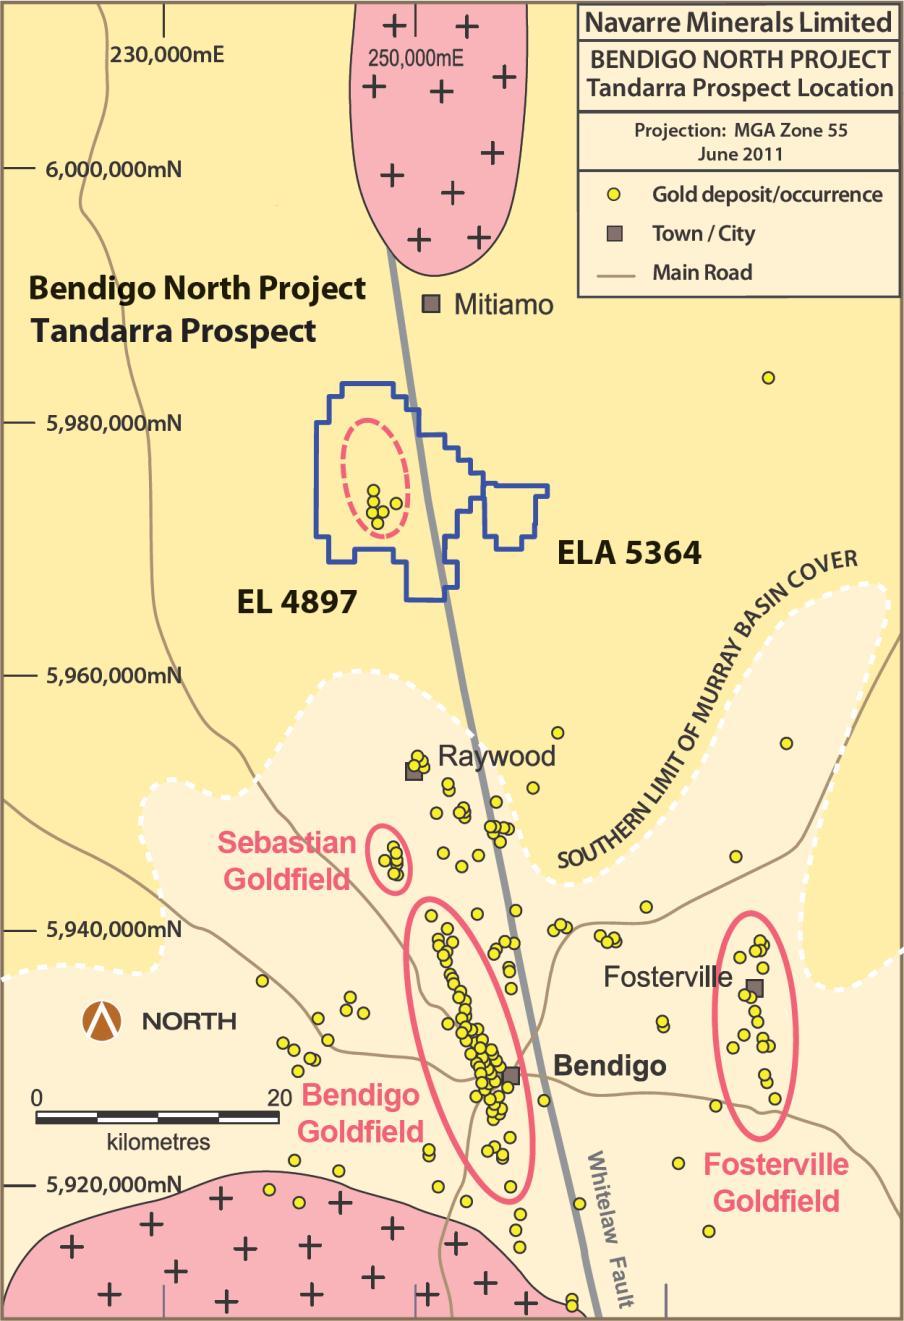 Bendigo North Gold Project Pristine greenfields discovery in underexplored area Concealed by shallow cover Along the same fault line as the 22Moz Bendigo Goldfield Host rocks, structure and